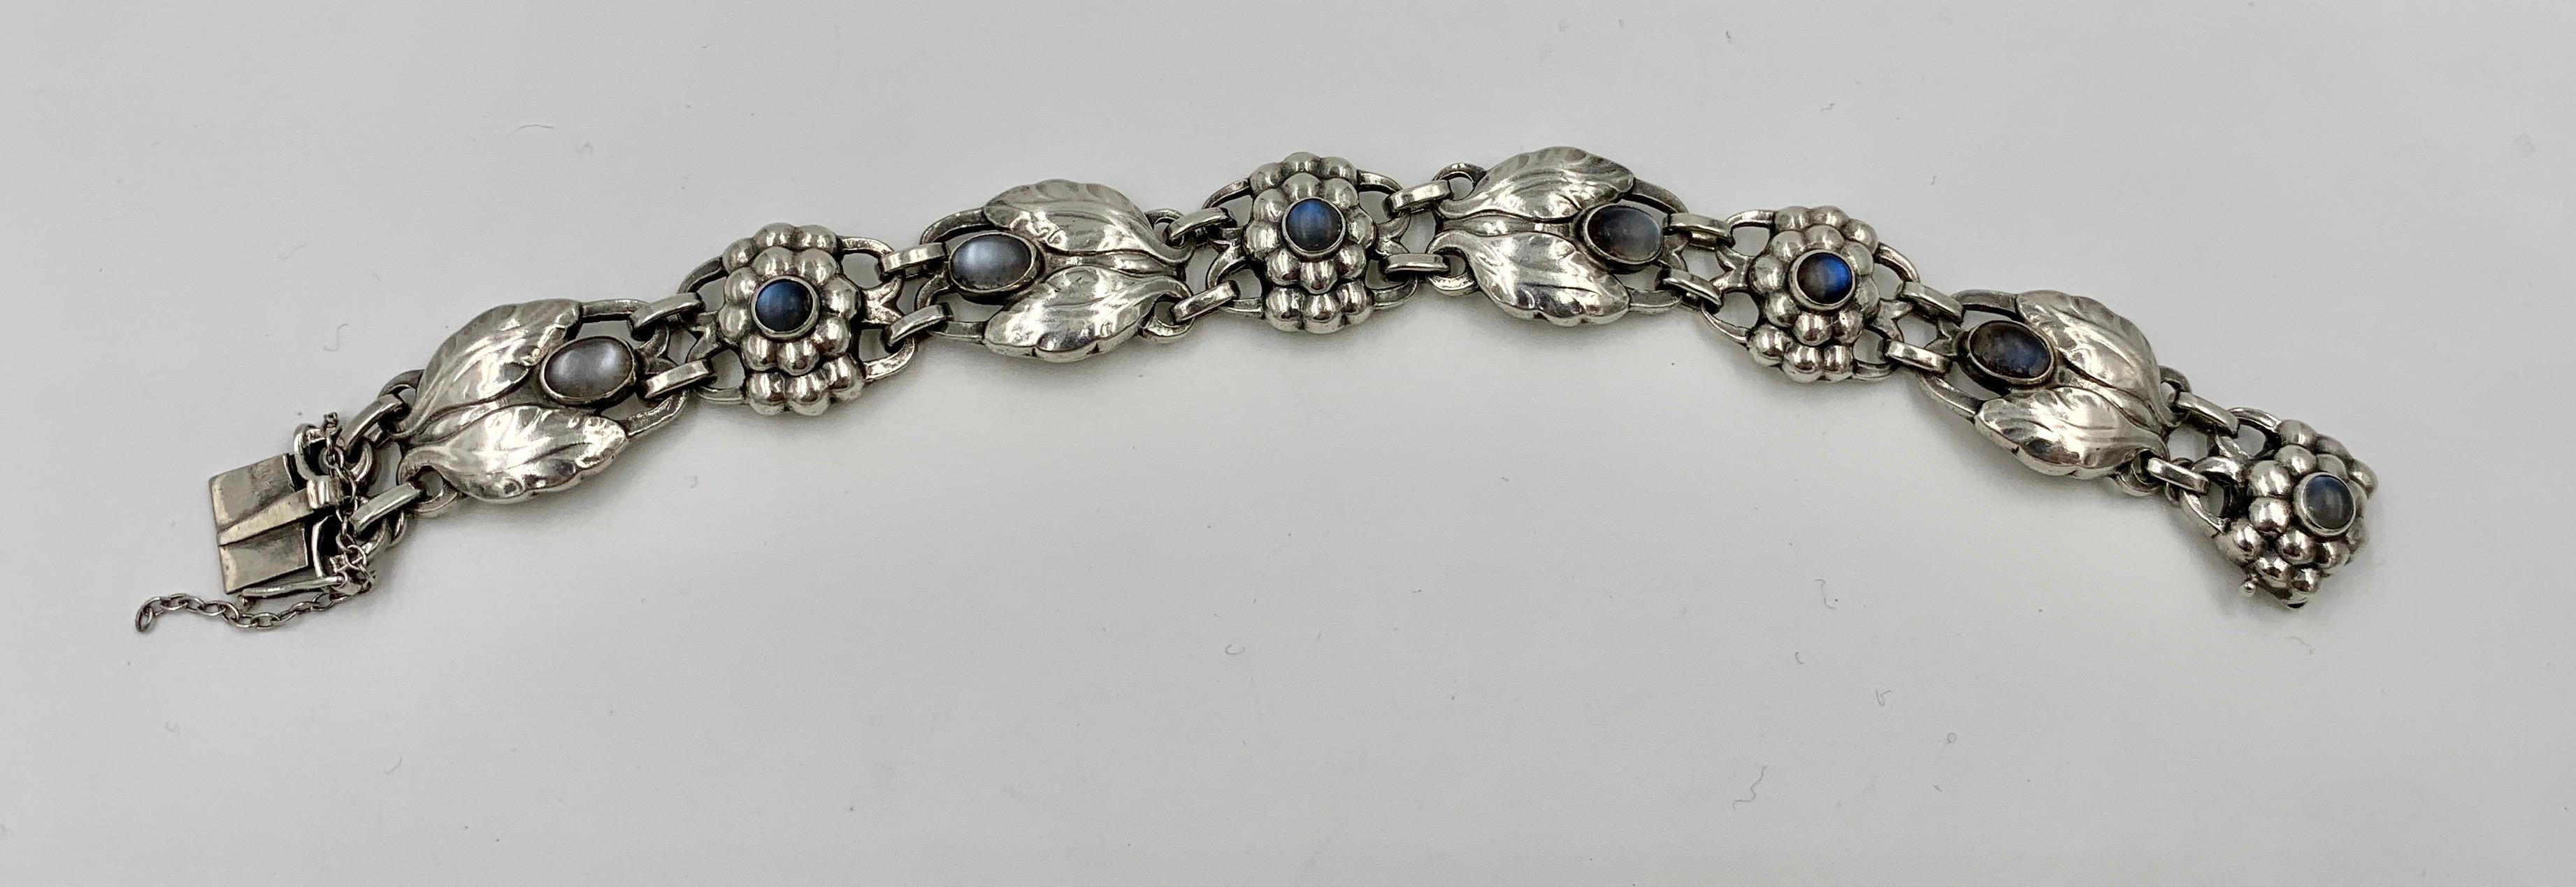 A rare Georg Jensen Moonstone Bracelet Number 3 with the early GJ mark dating the piece to 1933-1944.   A very special bracelet and very rare to find with Moonstones and from the Arts and Crafts Period.
The bracelet has beautiful patina on the